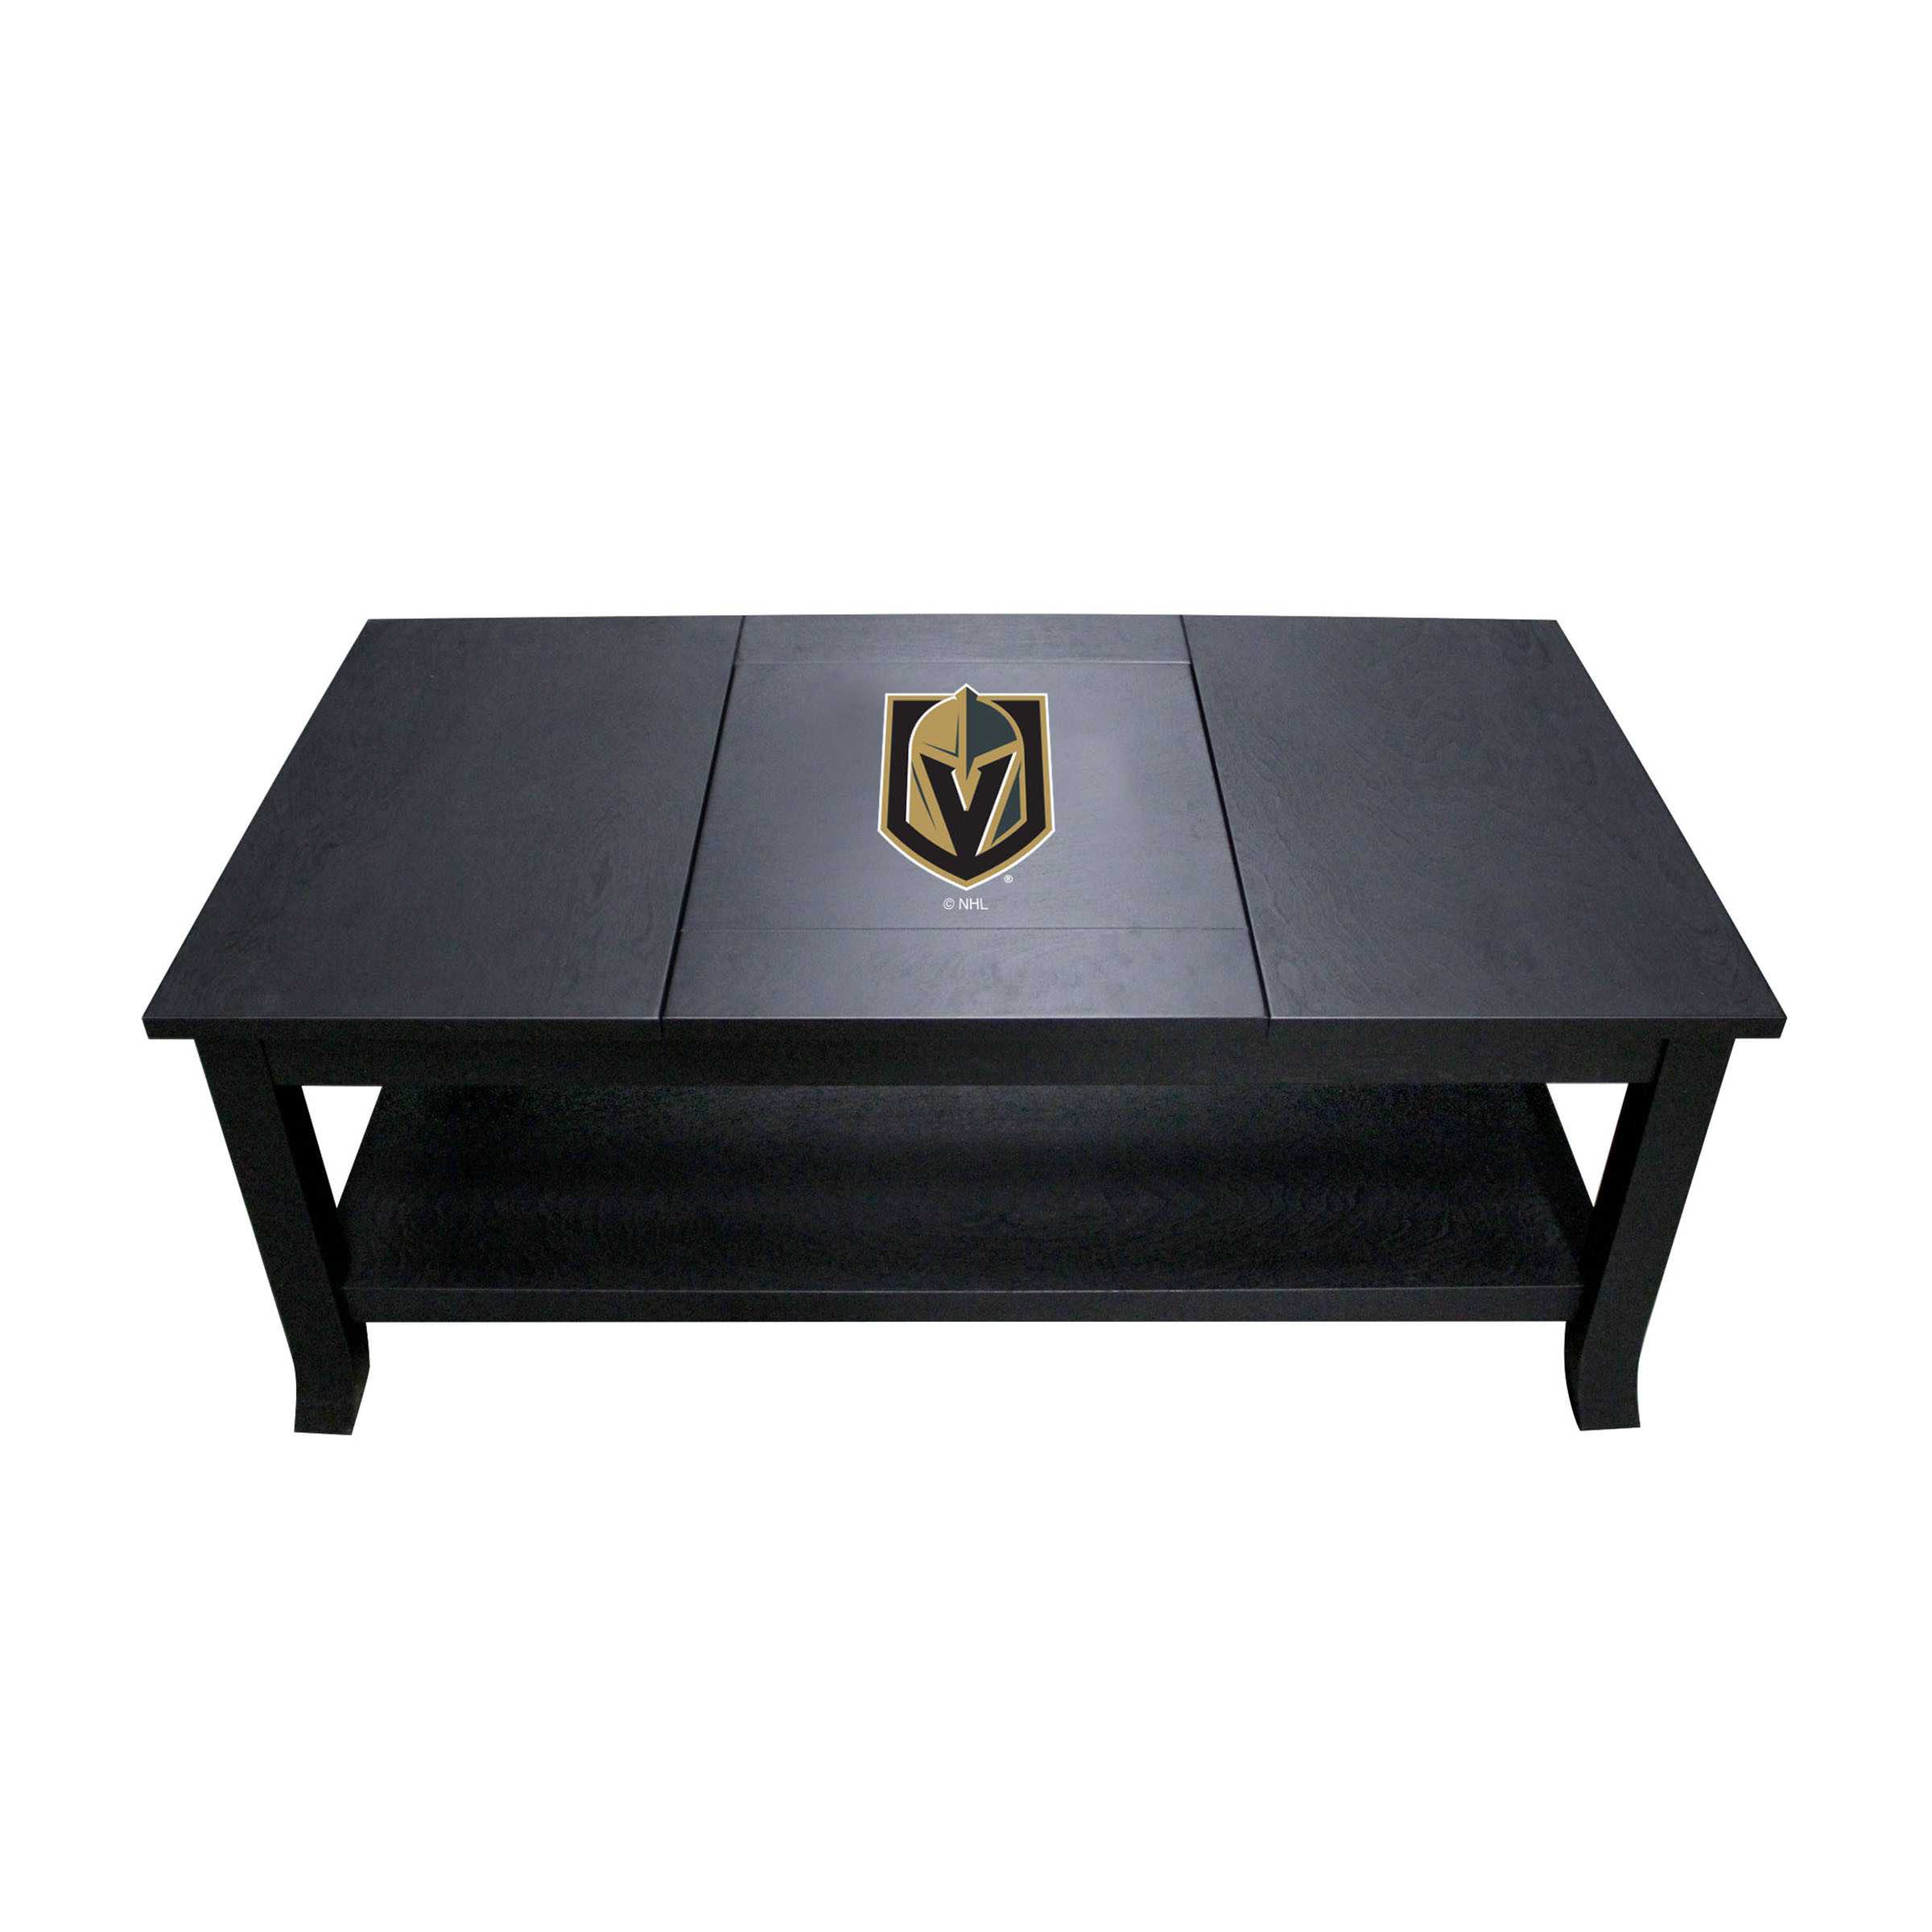 GOLDEN KNIGHTS COFFEE TABLE